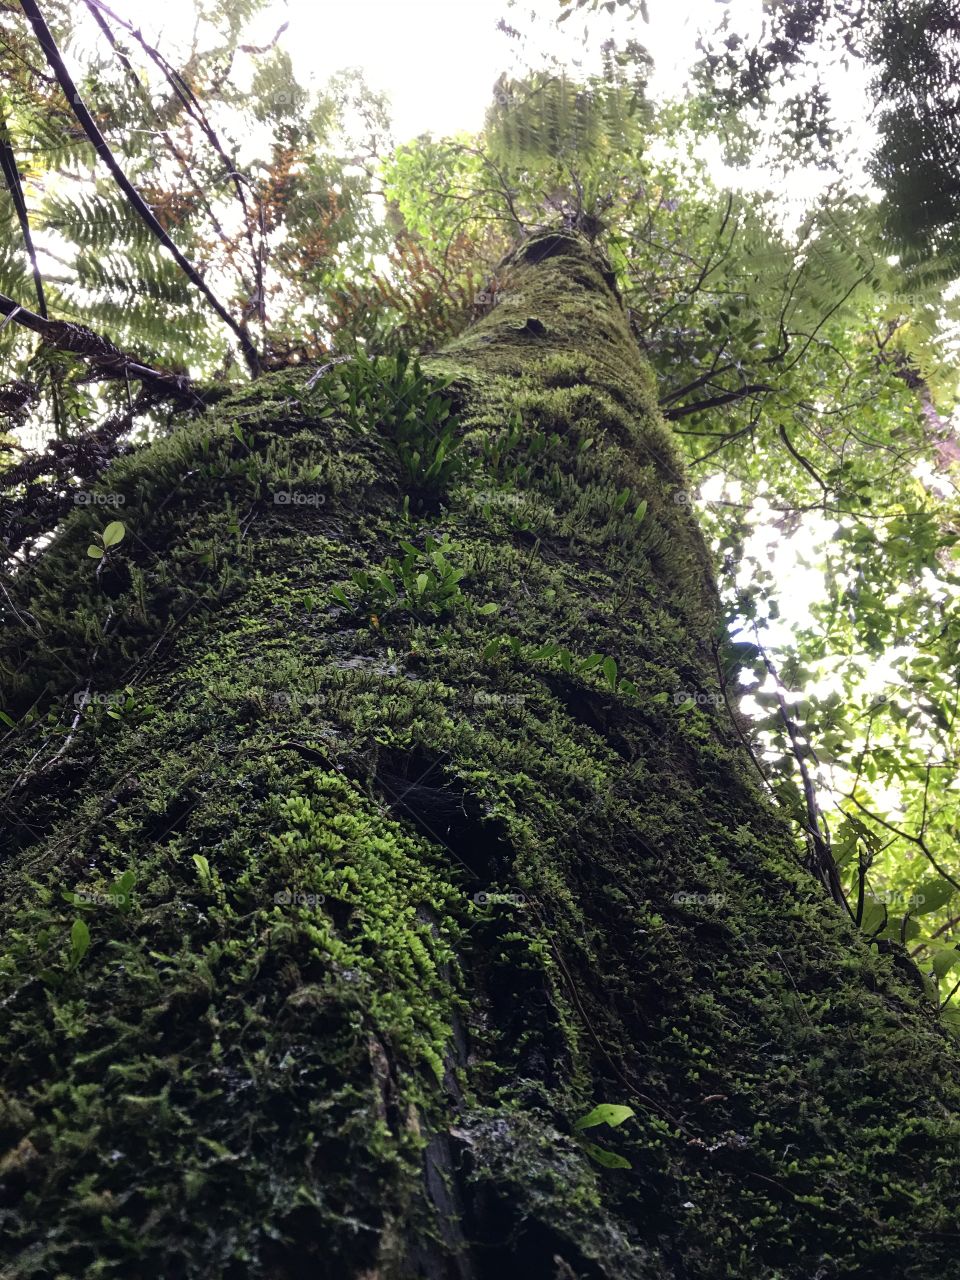 The mossy giant